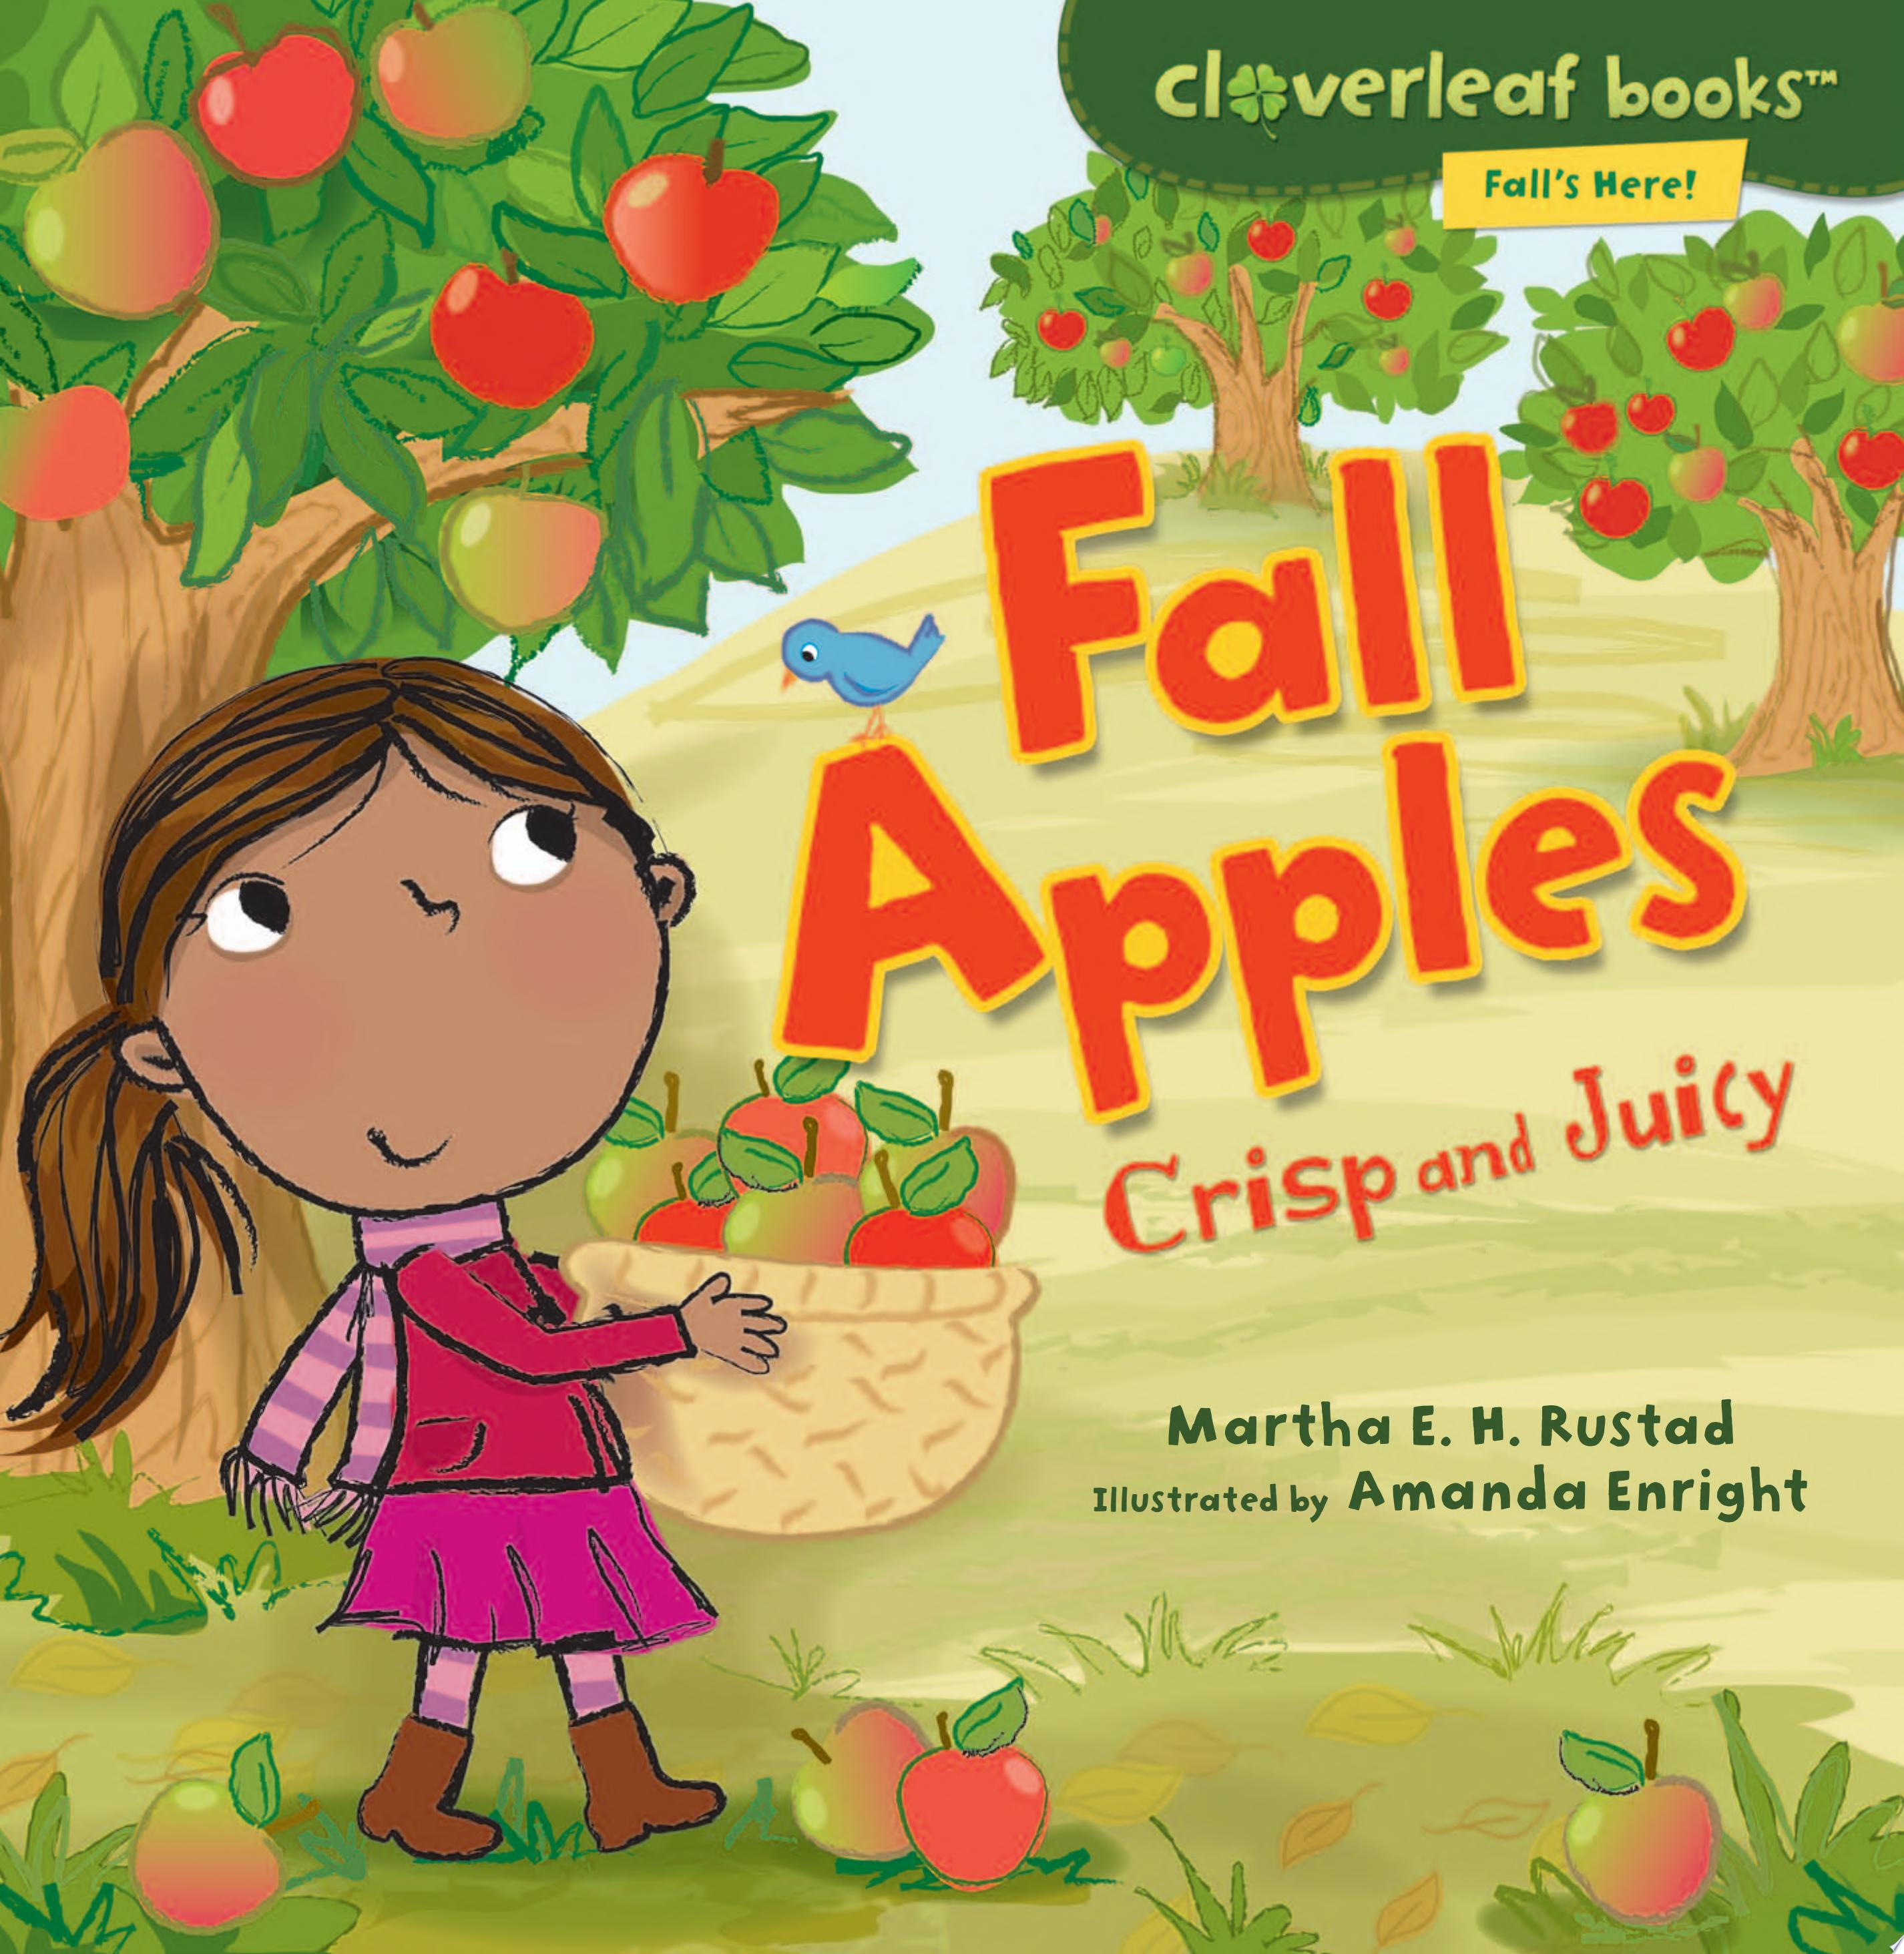 Image for "Fall Apples"